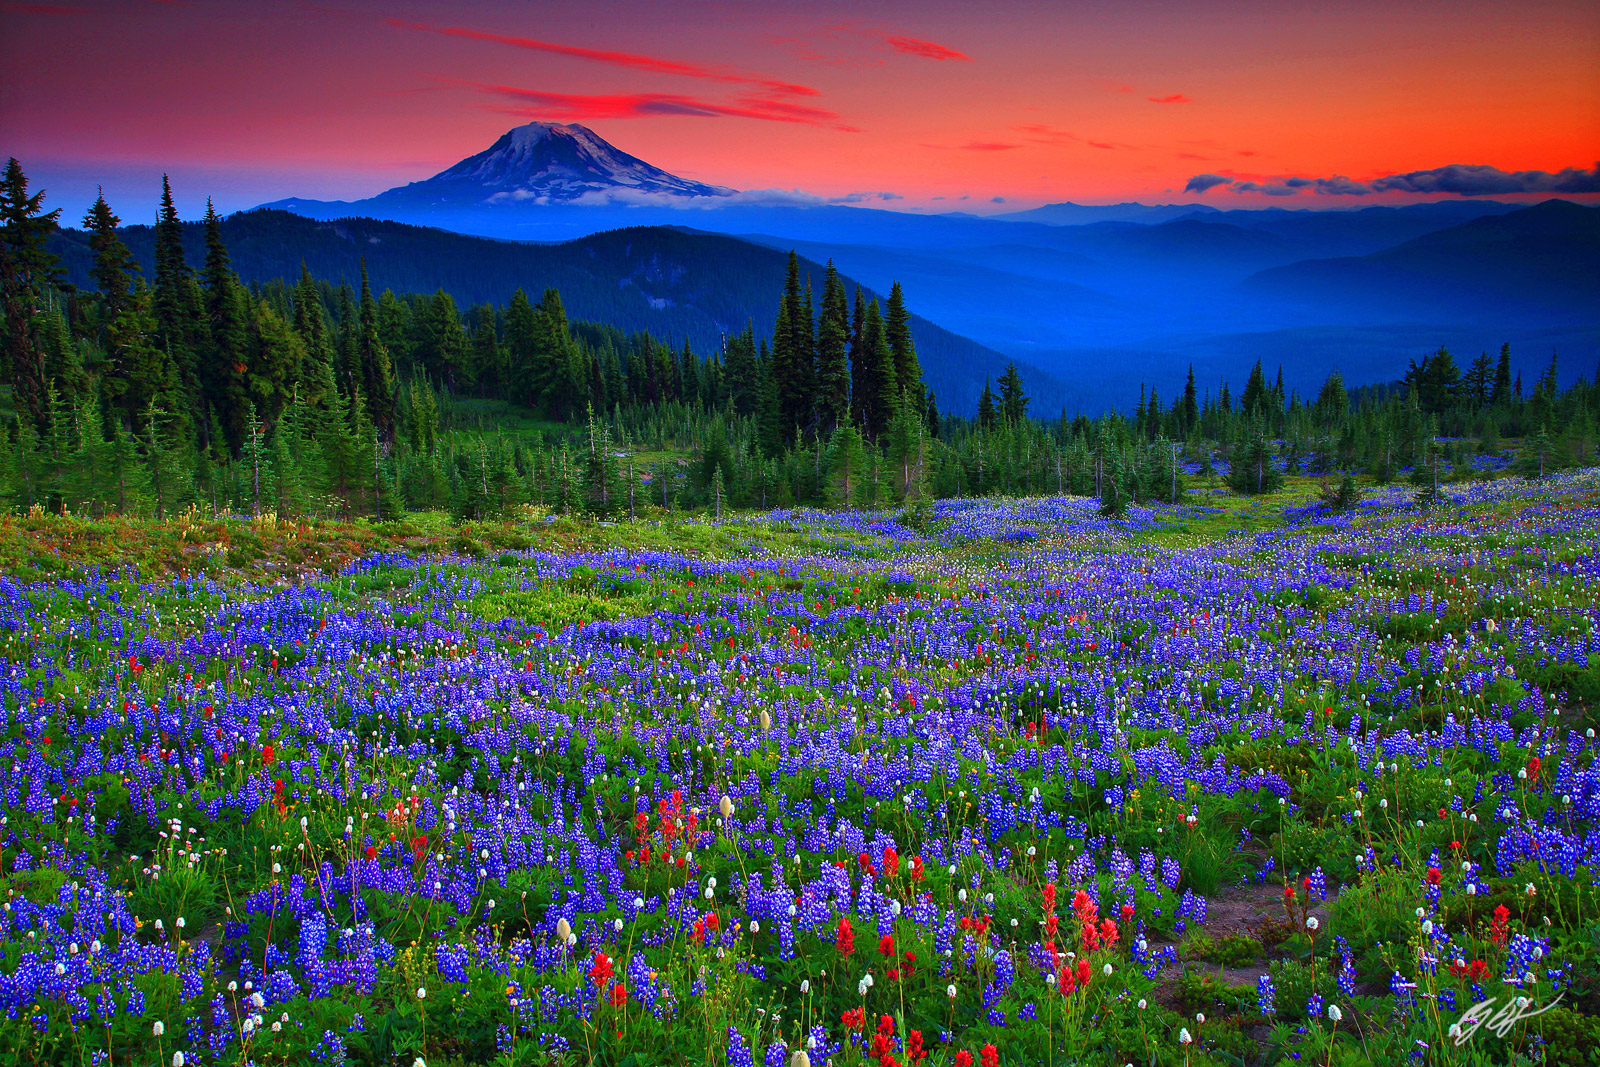 Sunset Wildflowers and Mt Adams in the Goat Rocks Wilderness in Washington